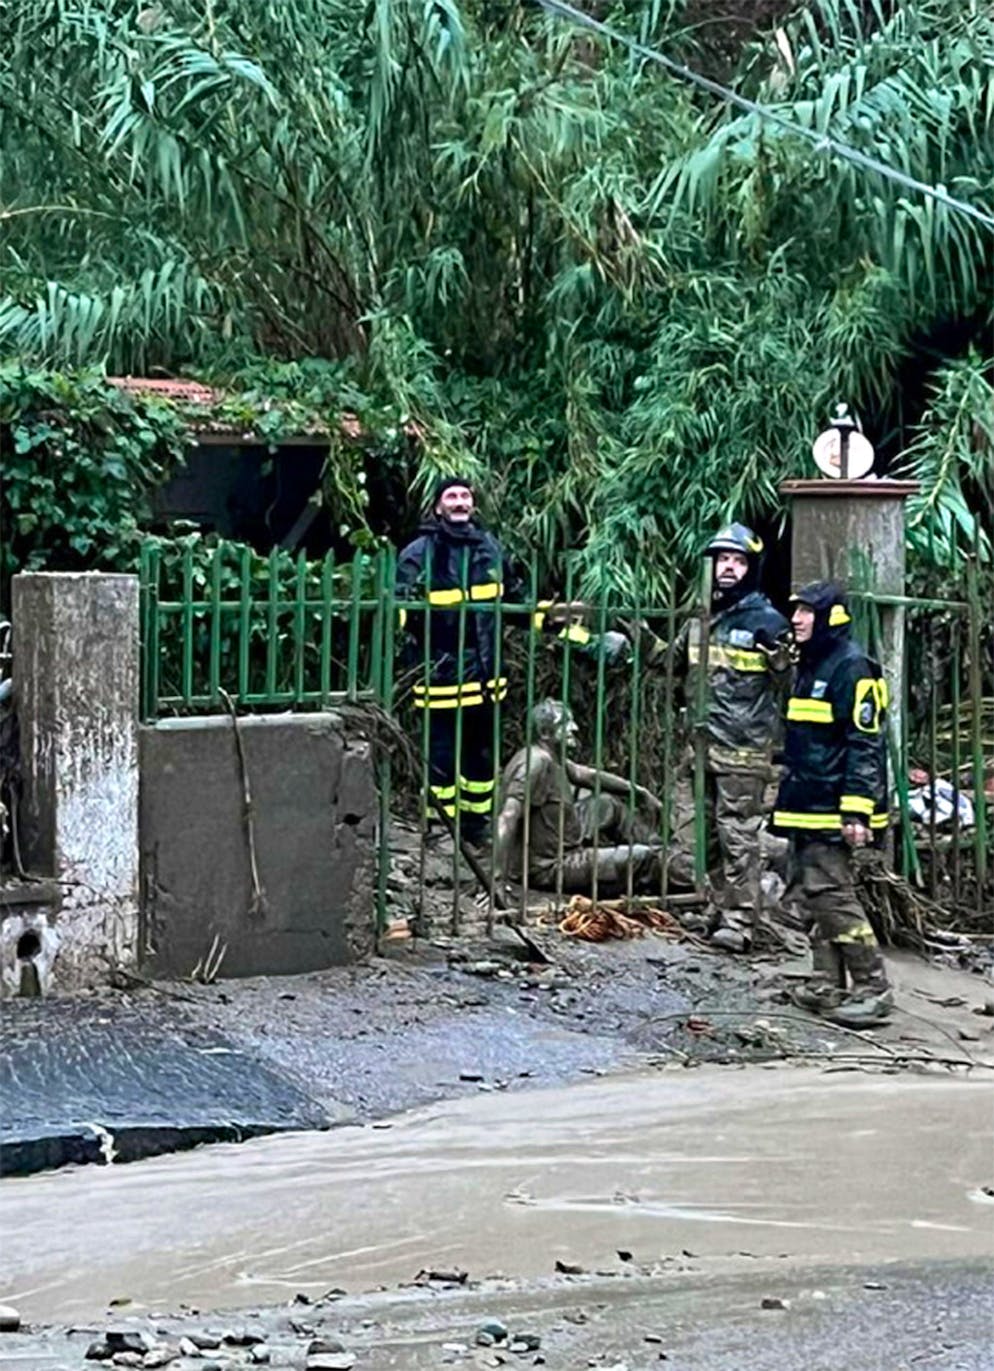 epa10329615 A man affected by the landslide is rescued by firefighters in Casamicciola, Ischia Island, Southern Italy, 26 November 2022. Thirteen people went missing on 26 November after heavy rains caused a landslide on the Italian island of Ischia.  EPA/ANSA ITALY OUT. BEST QUALITY AVAILABE.